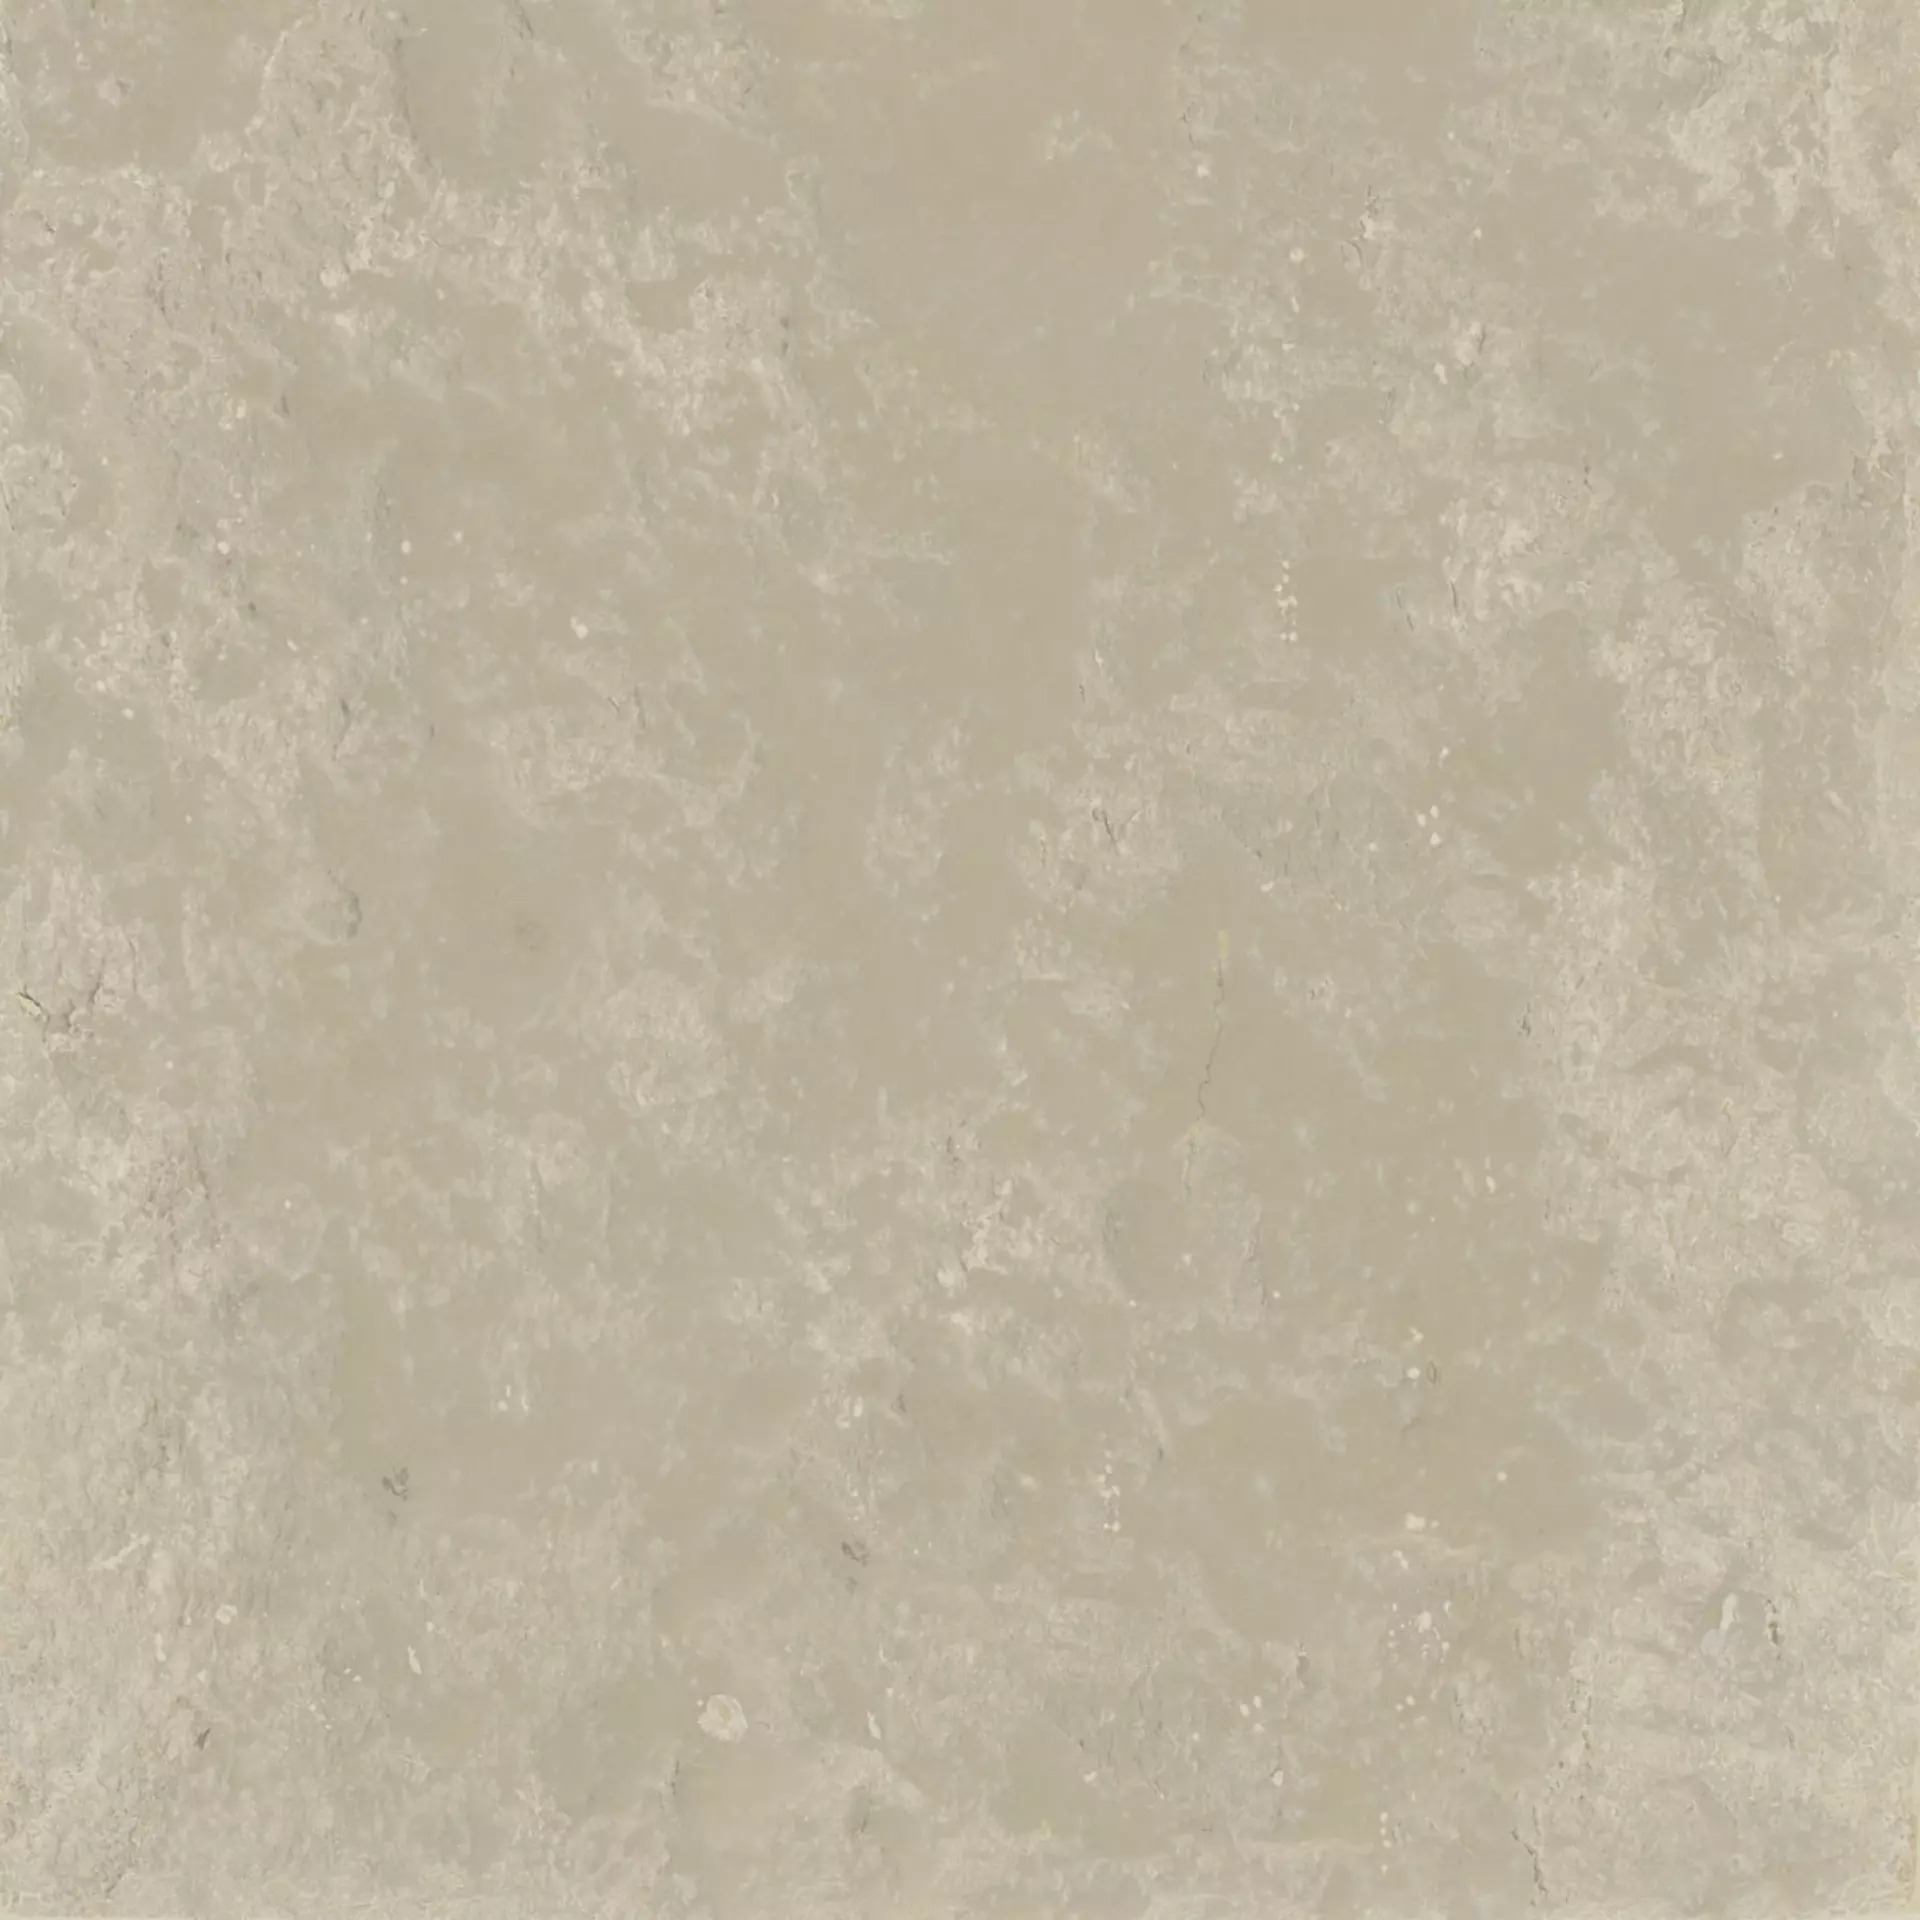 Keope Extreme Beige Strutturato 424E5731 60x60cm rectified 20mm